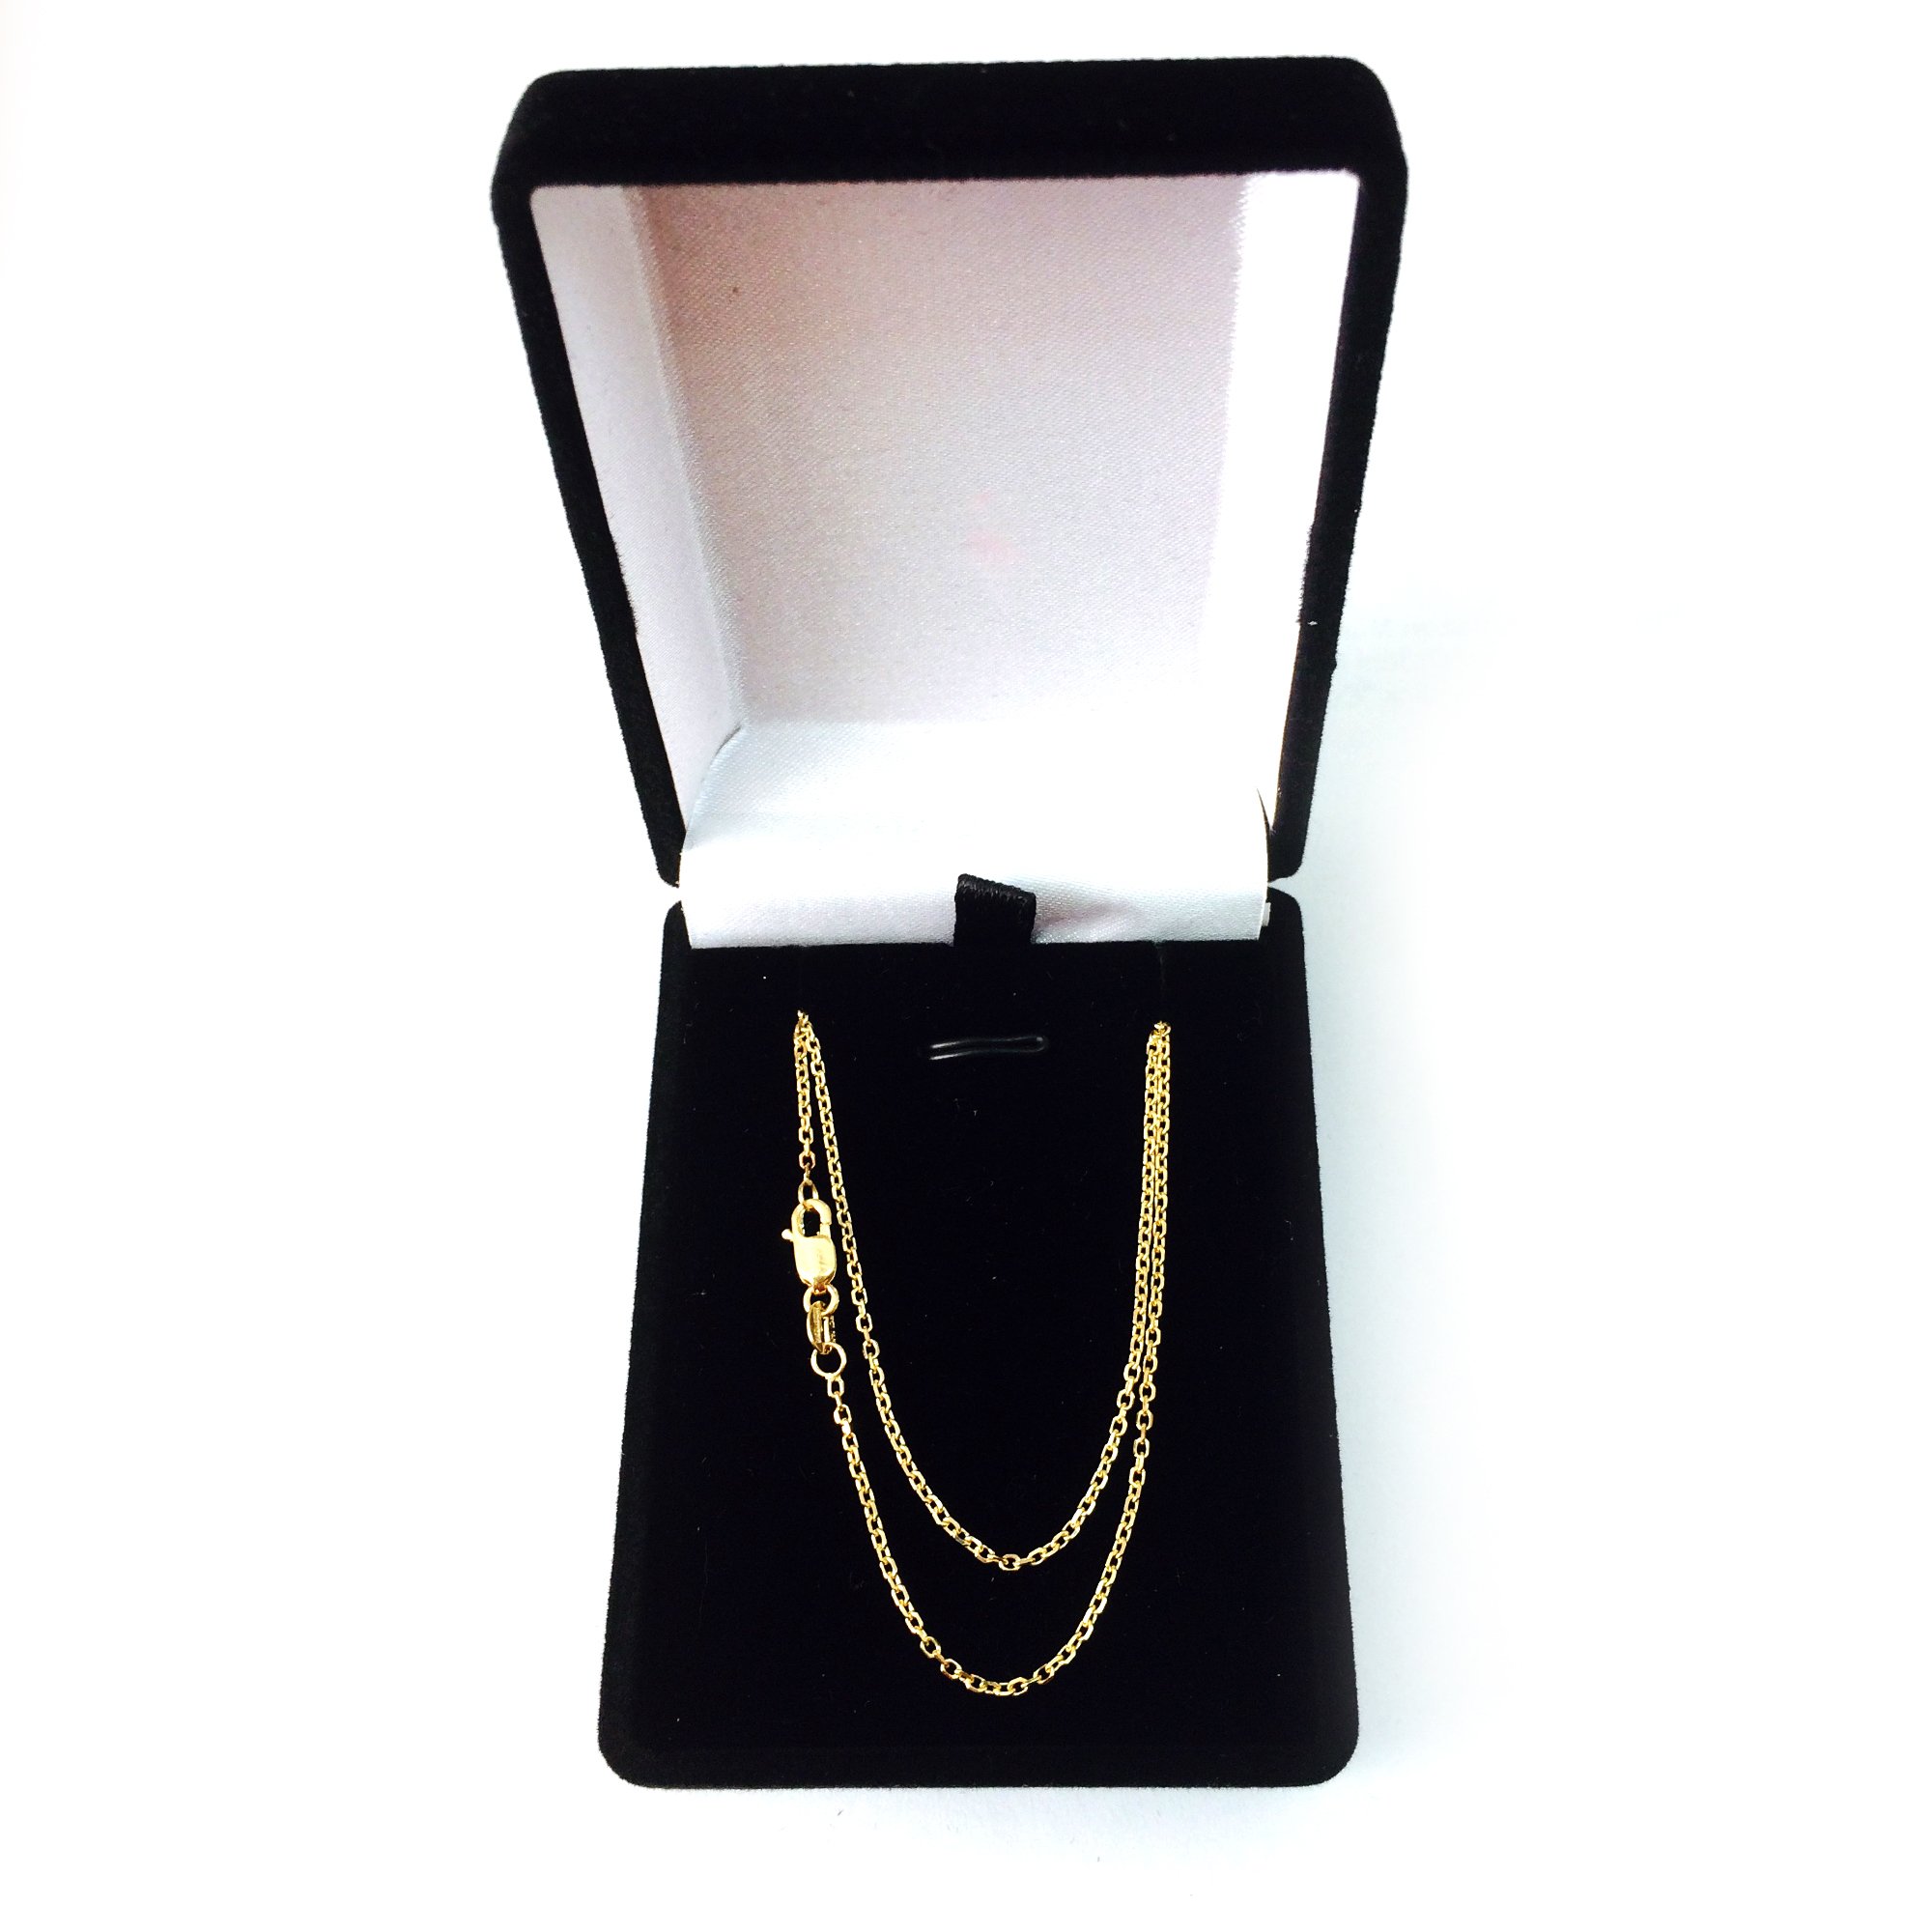 Jewelry Affairs 14k Yellow Gold Cable Link Chain Necklace, 1.4mm